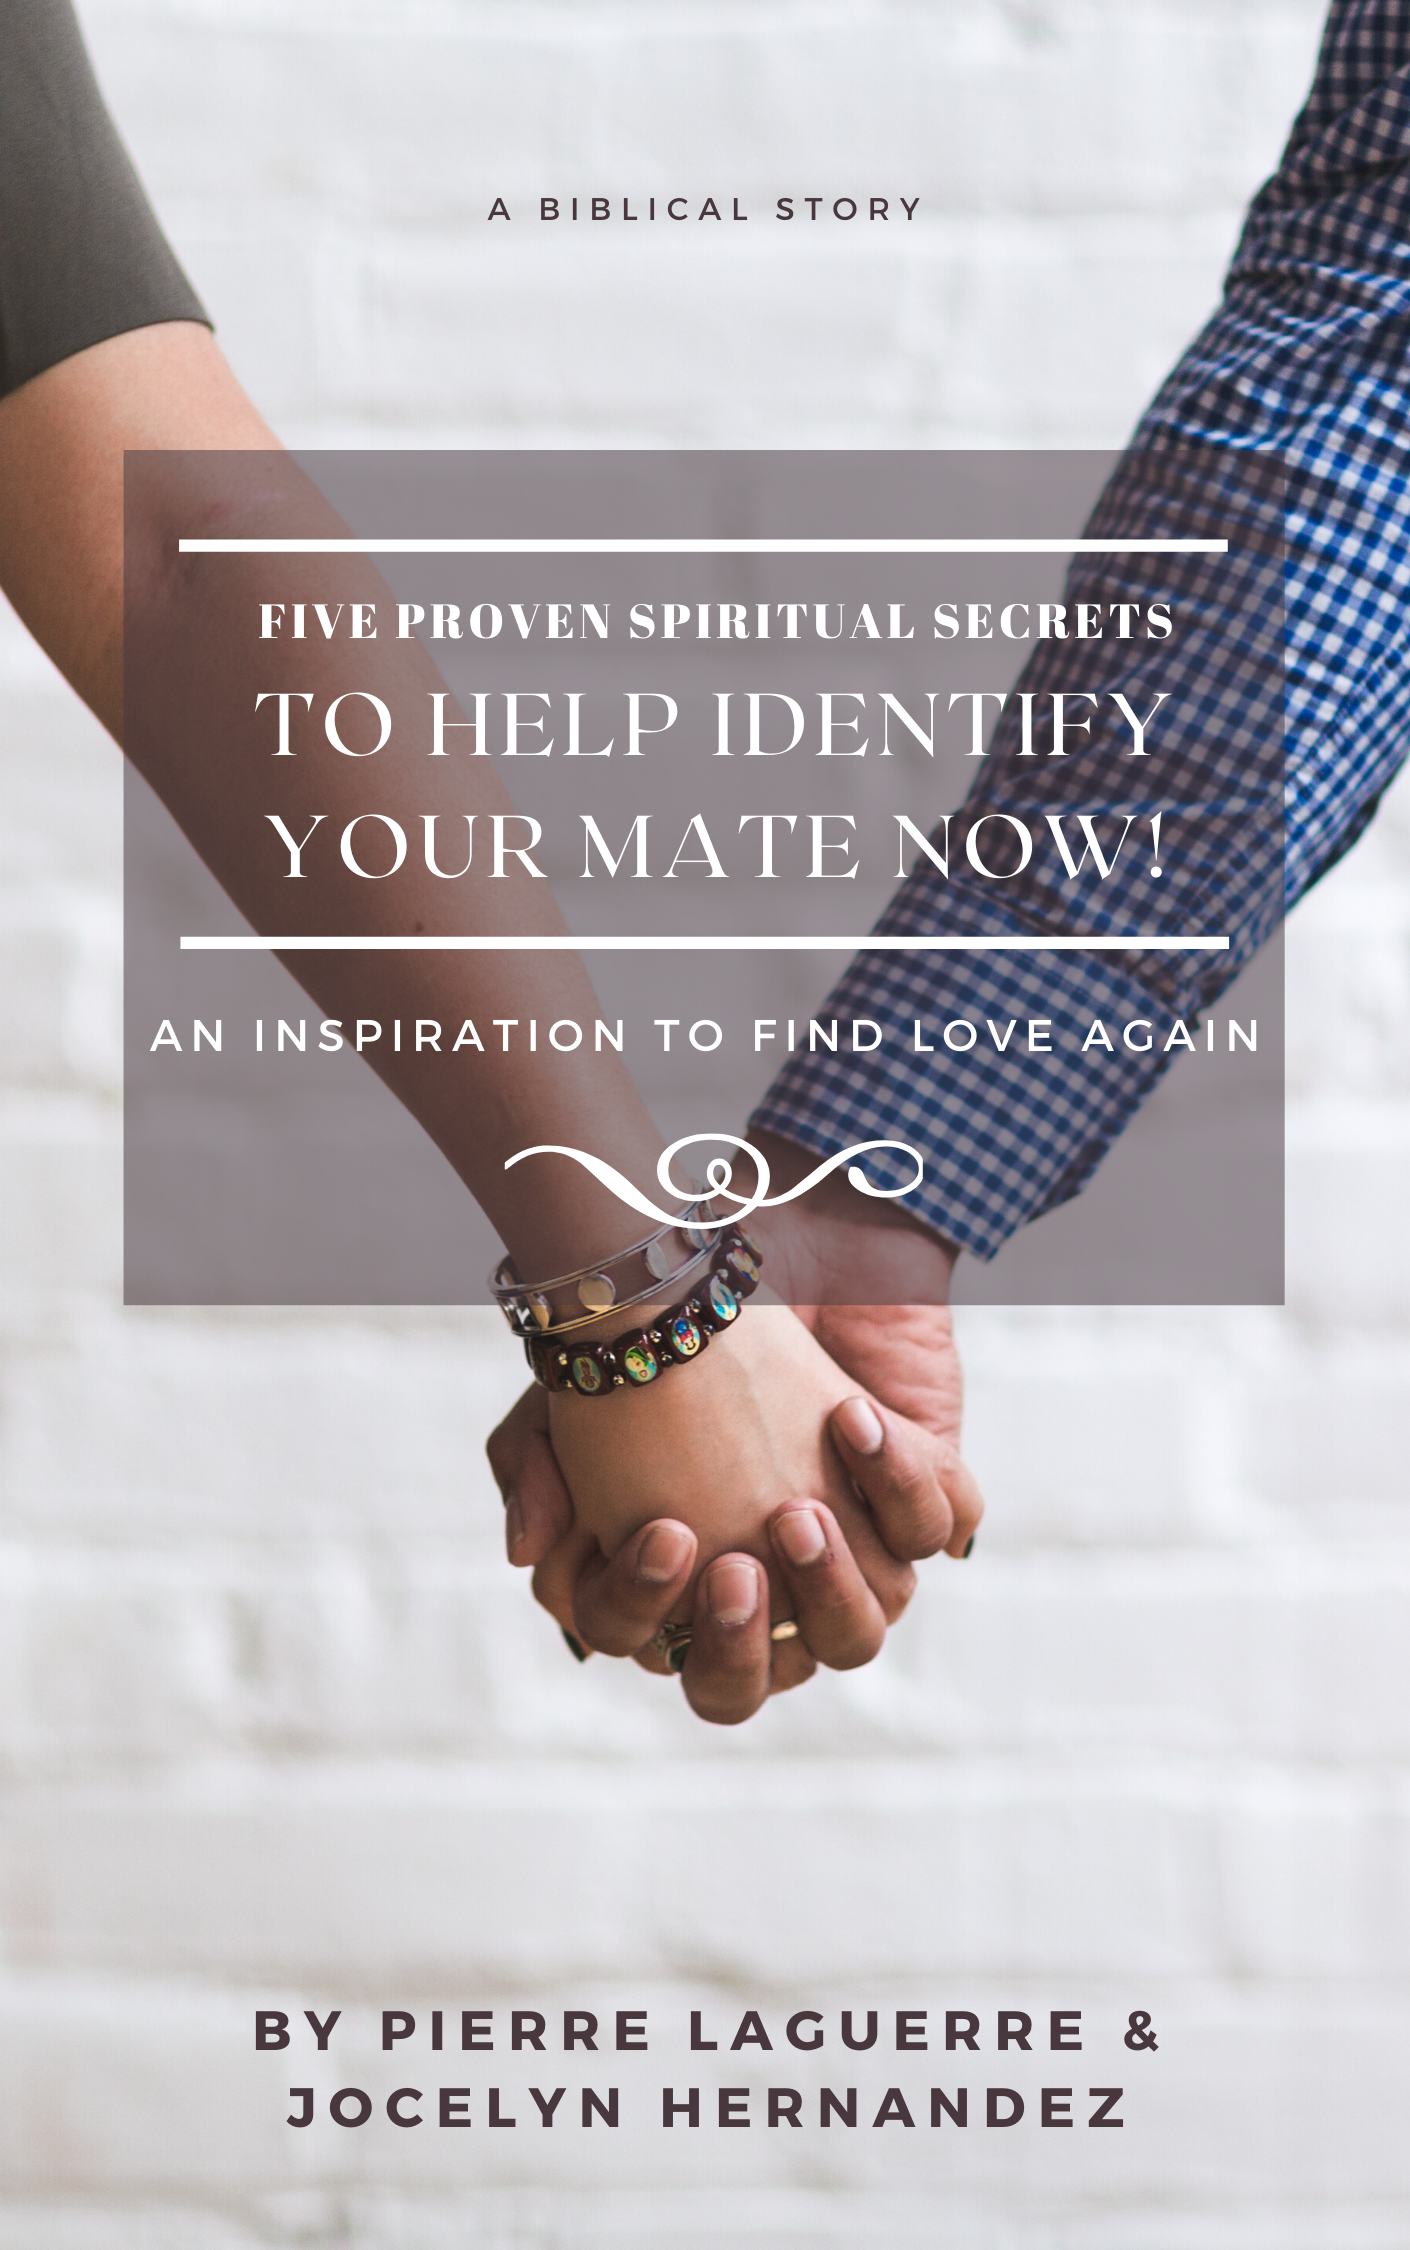 Five Proven Spiritual Secrets To Help You Find Your Mate NOW